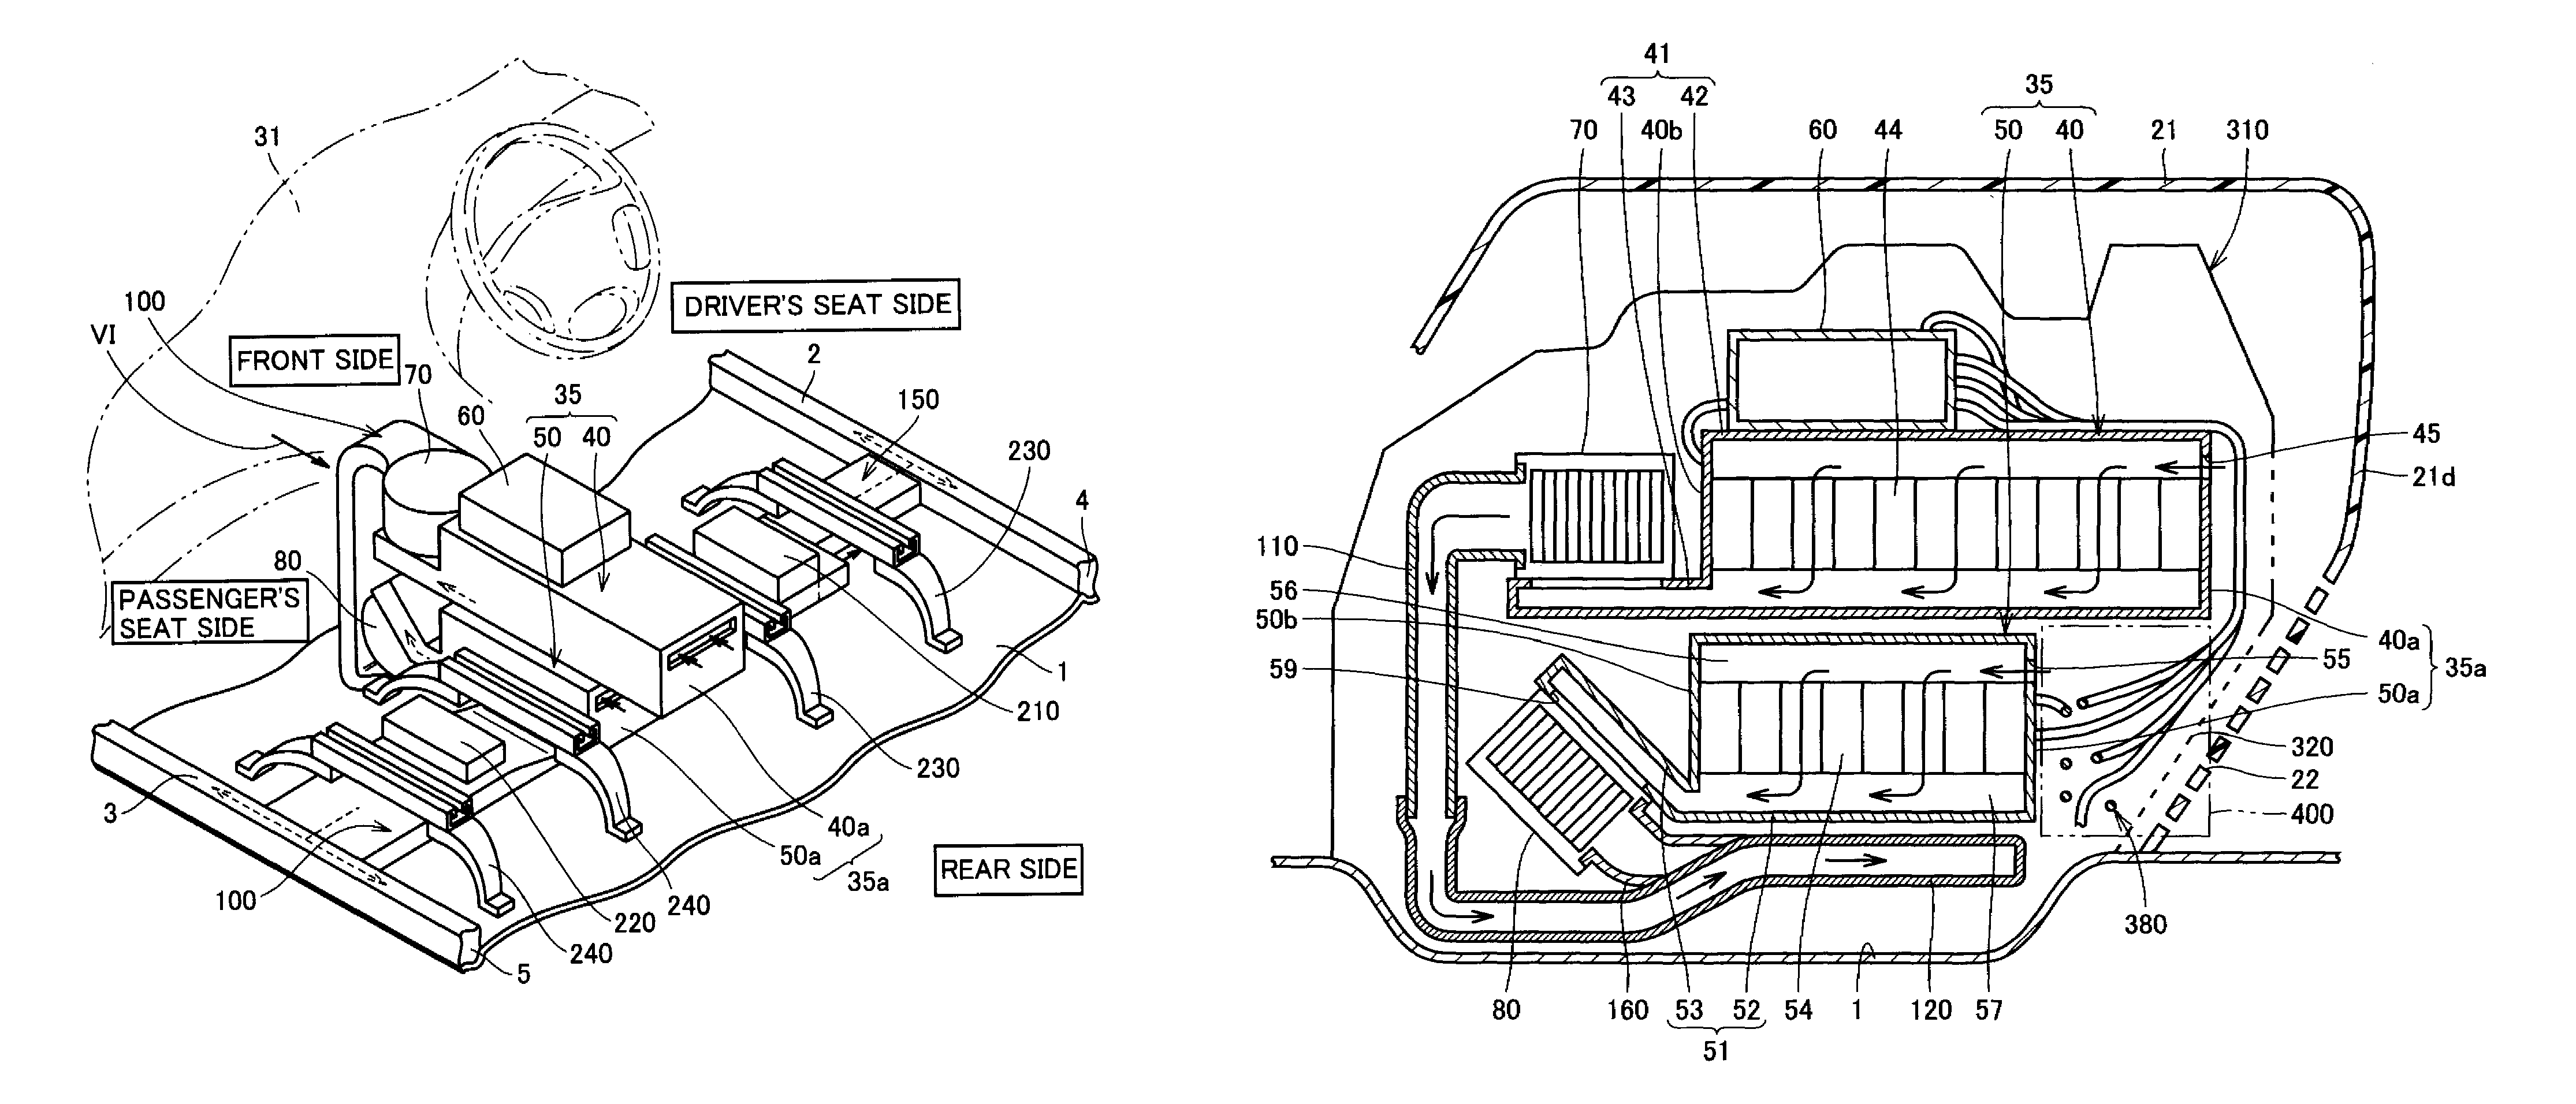 Structure for mounting power supply apparatus on vehicle